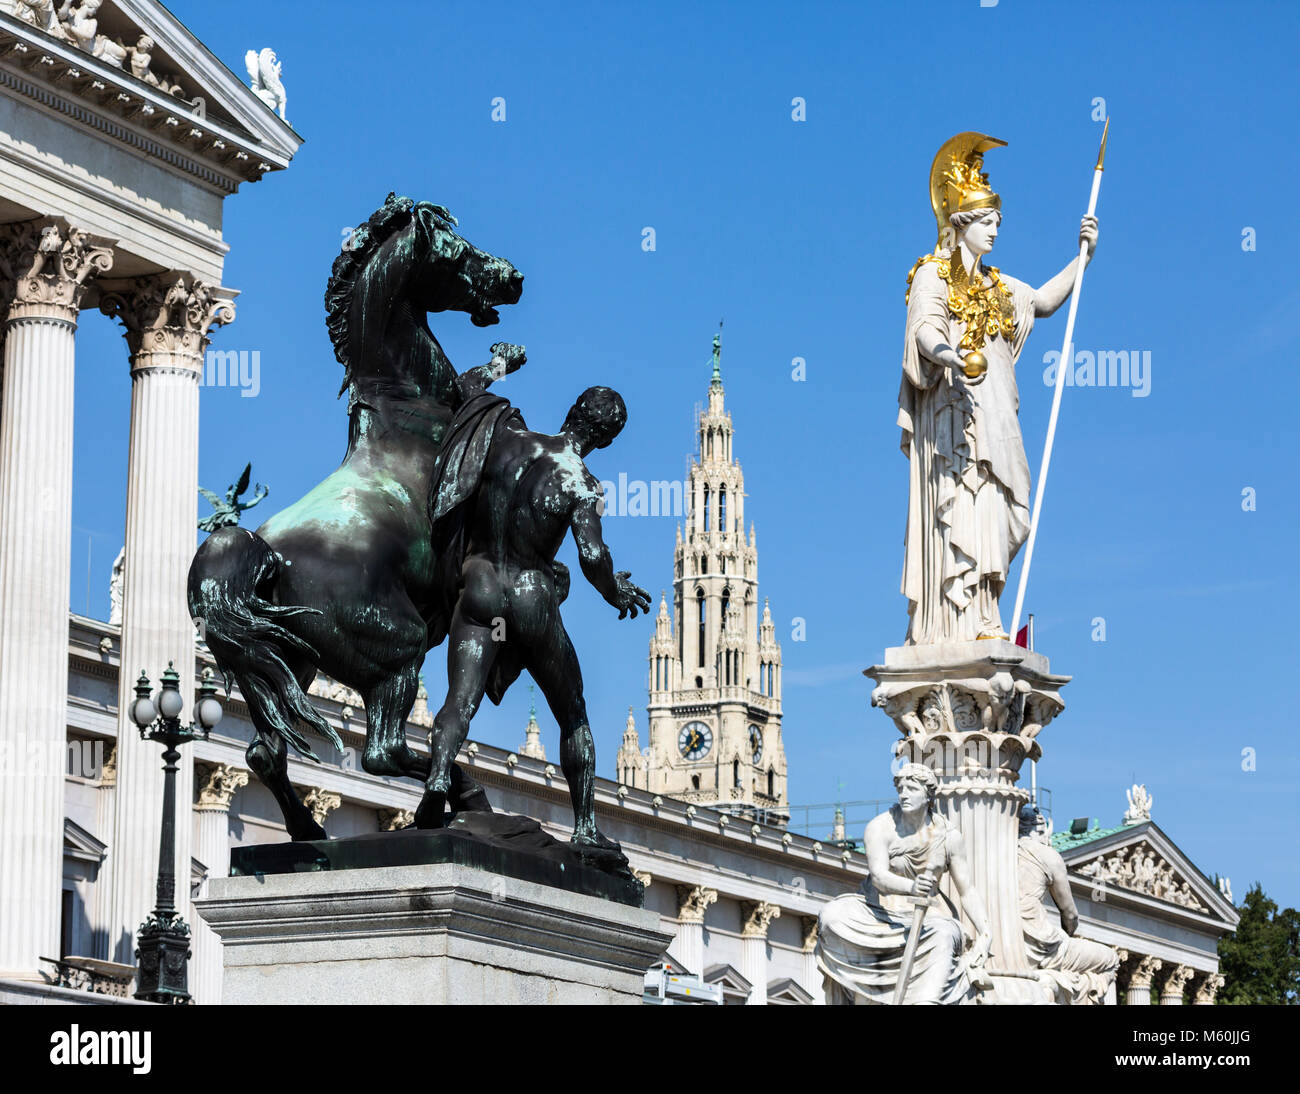 The horse tamer, Pallas Athena sculptures and Rathaus steeple, Austrian Parliament Building, Ringstrasse, Vienna, Austria. Stock Photo